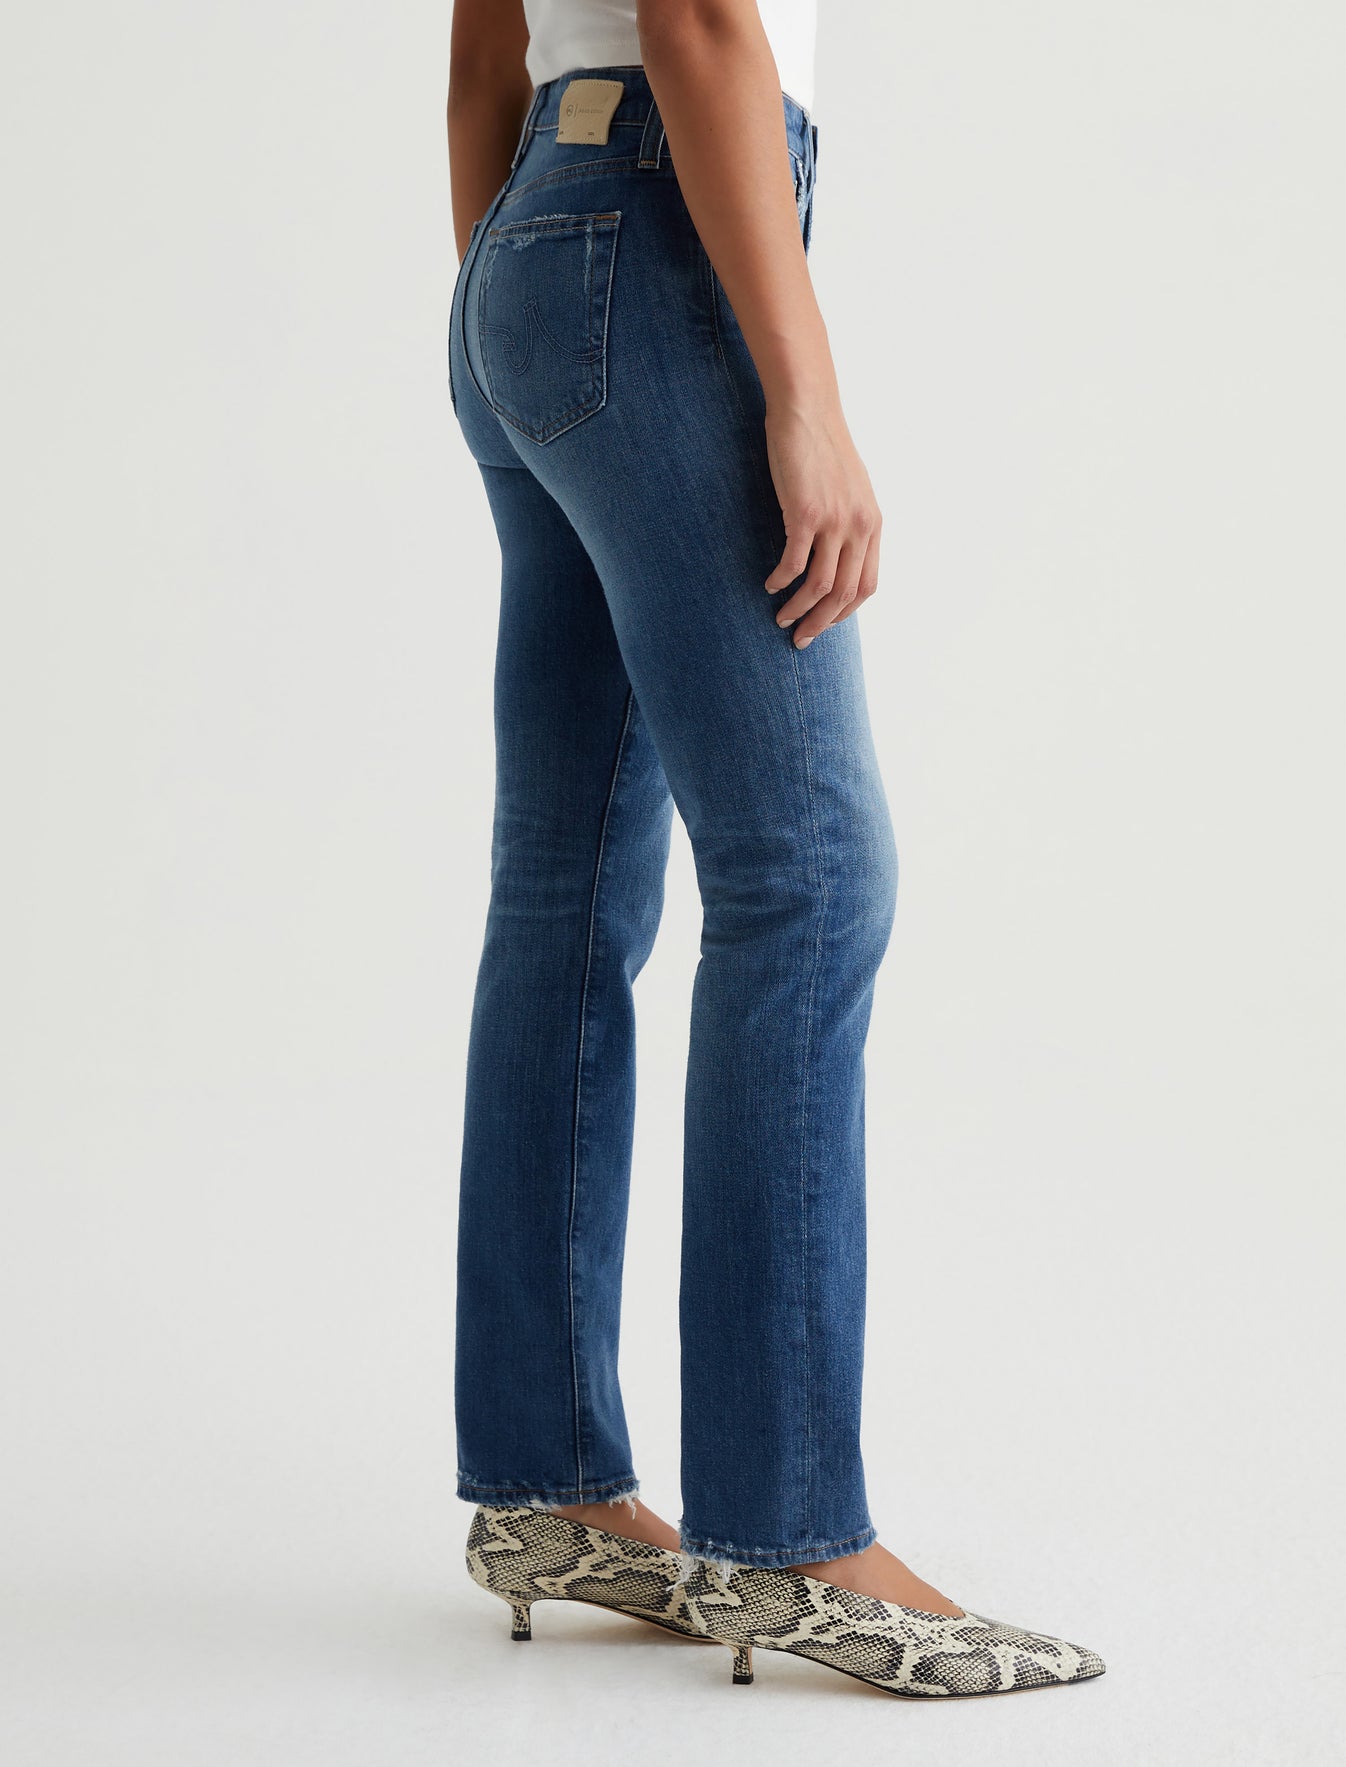 Mari Metaphor Jeans Women Store Years 14 AG Official at